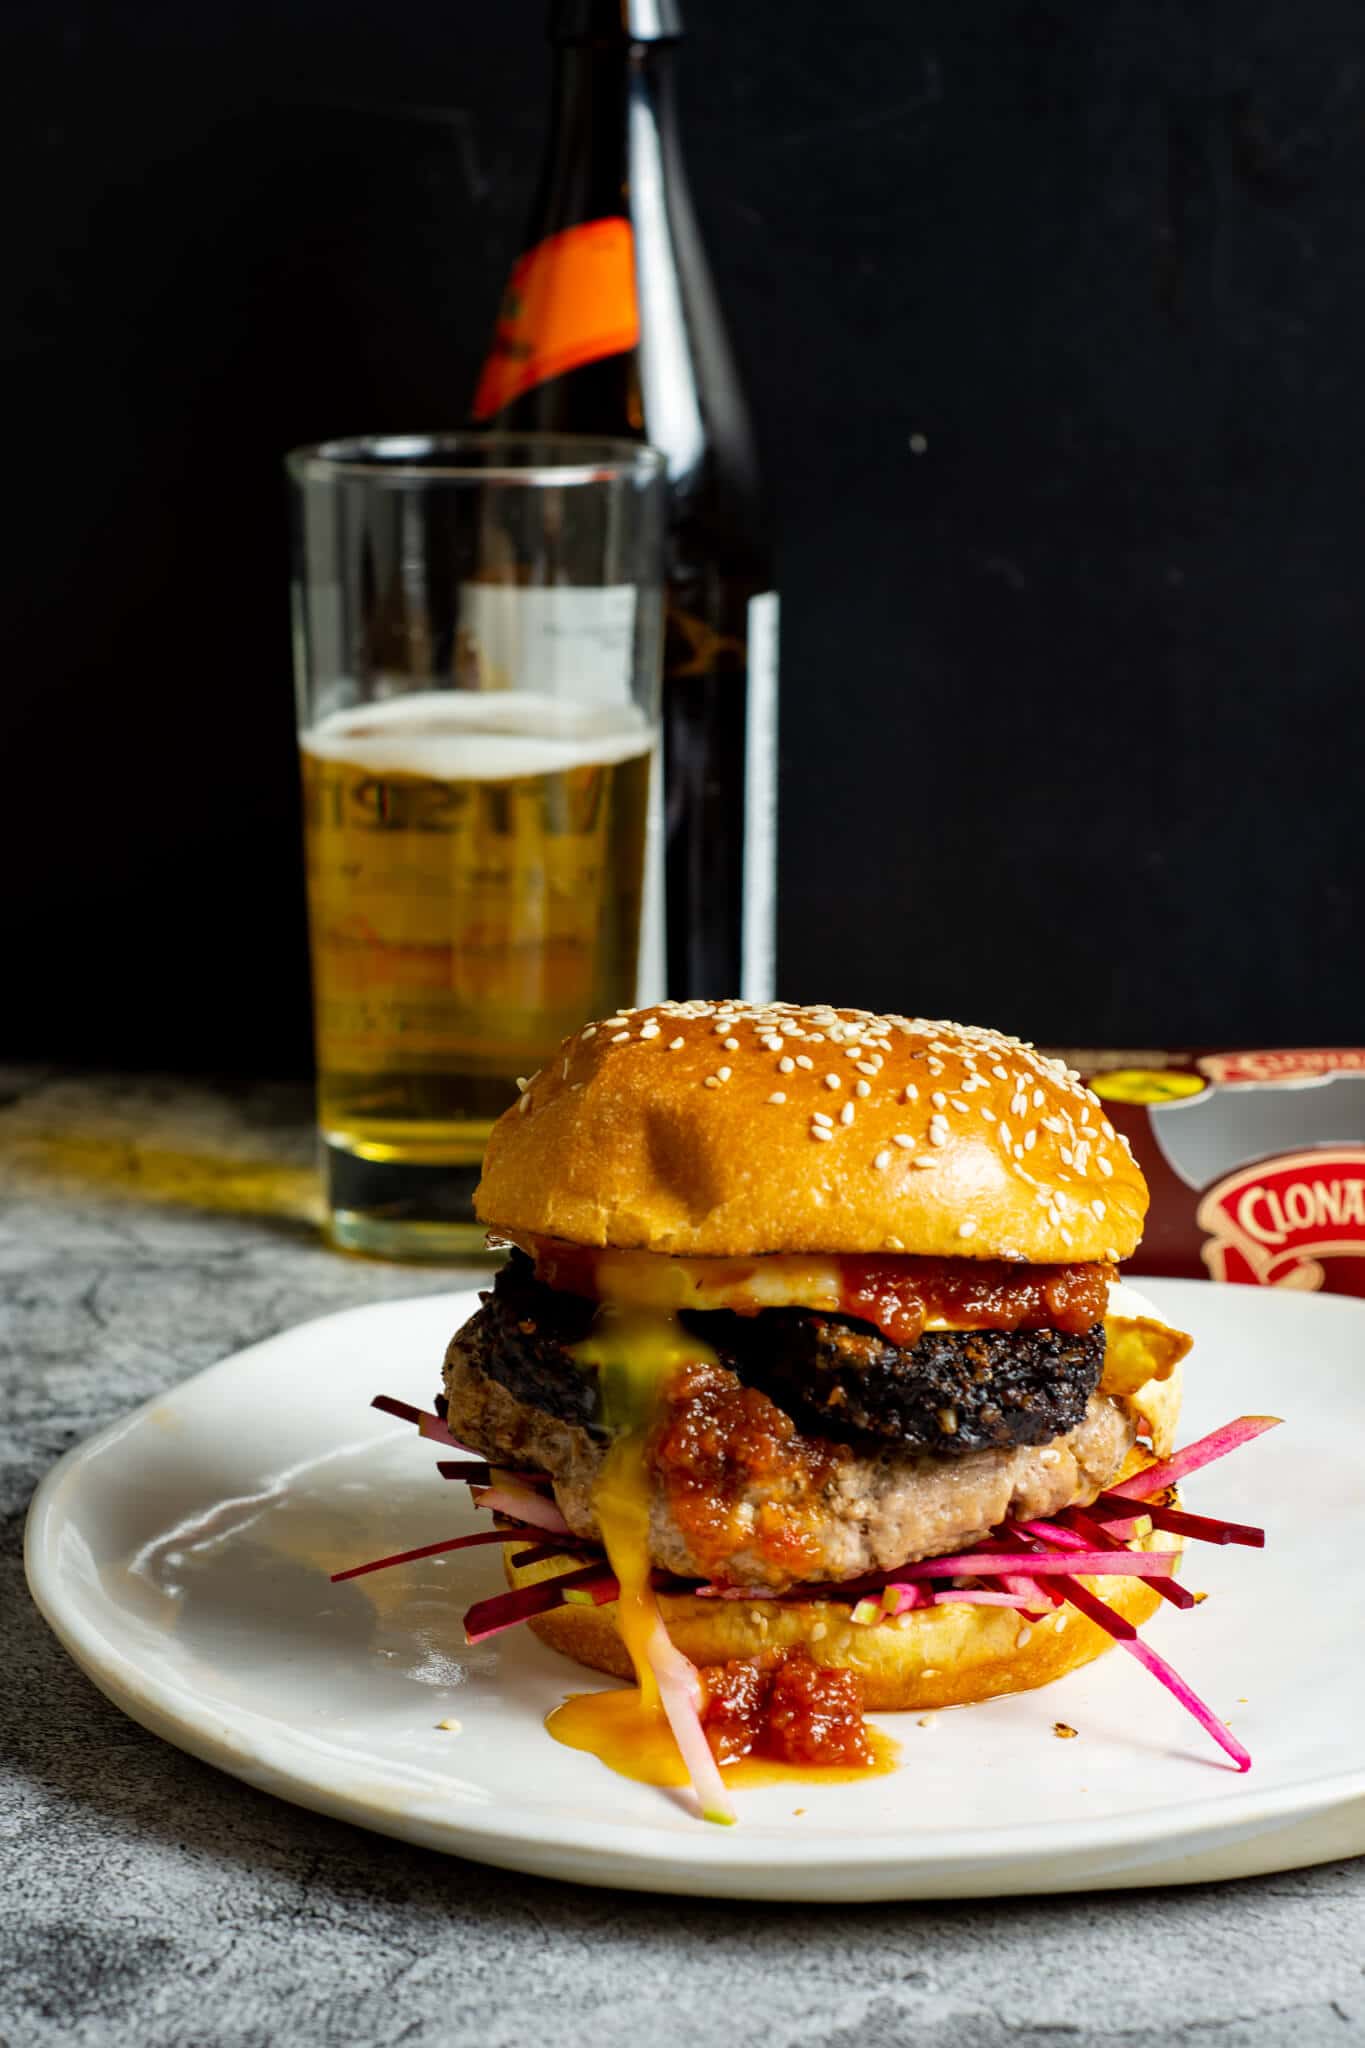 Pork & black pudding burger on a white plate with a beer in background